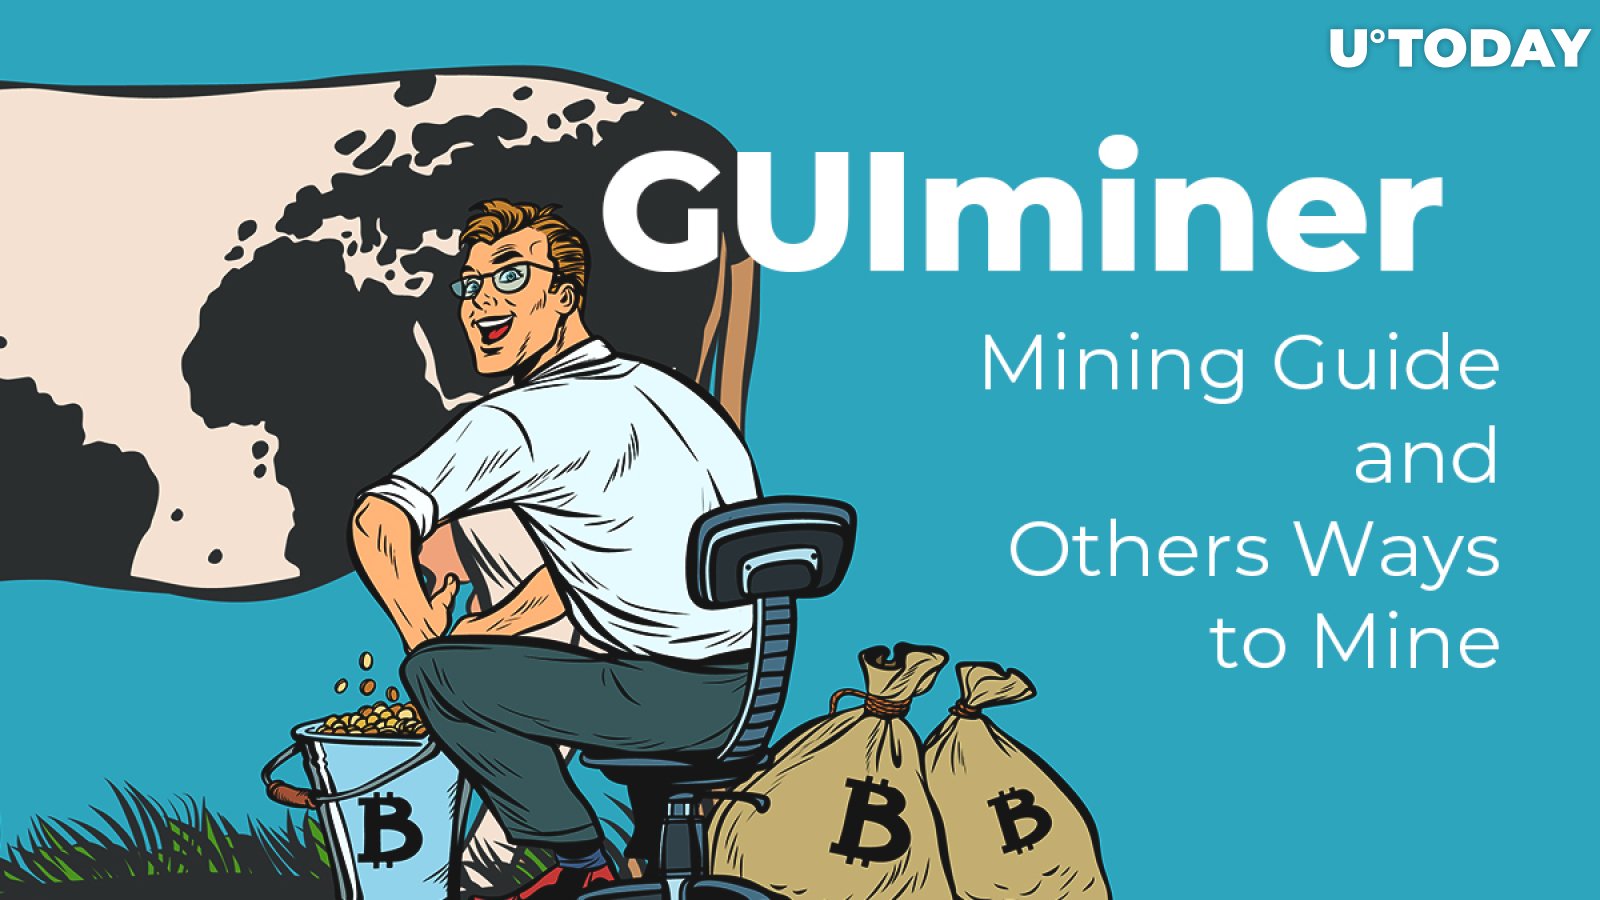 GUIminer Mining Guide and Others Ways to Mine Bitcoin in 2019